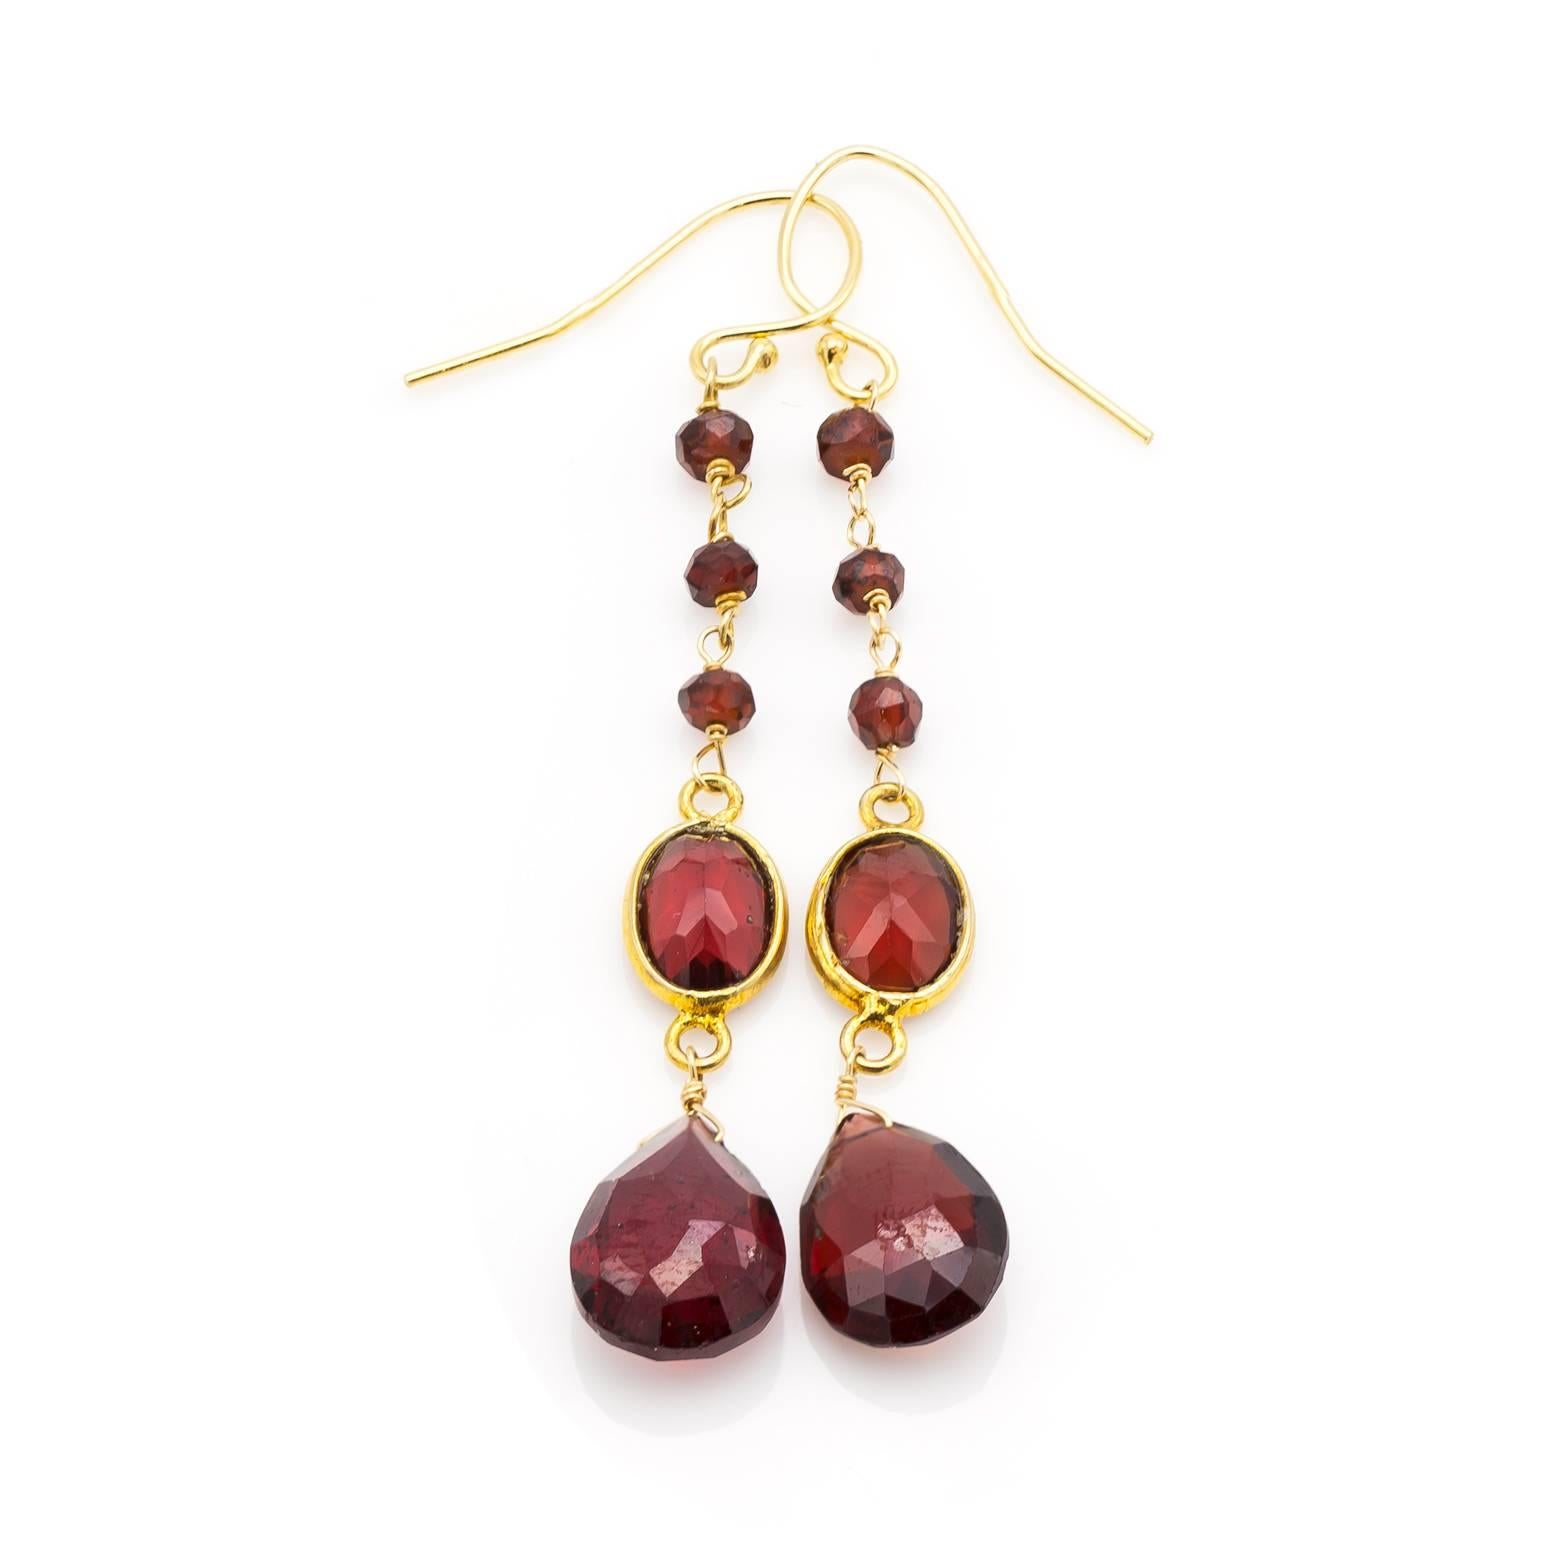 Contemporary Faceted Garnet and Gold Dangling Earrings in a Tapered Design